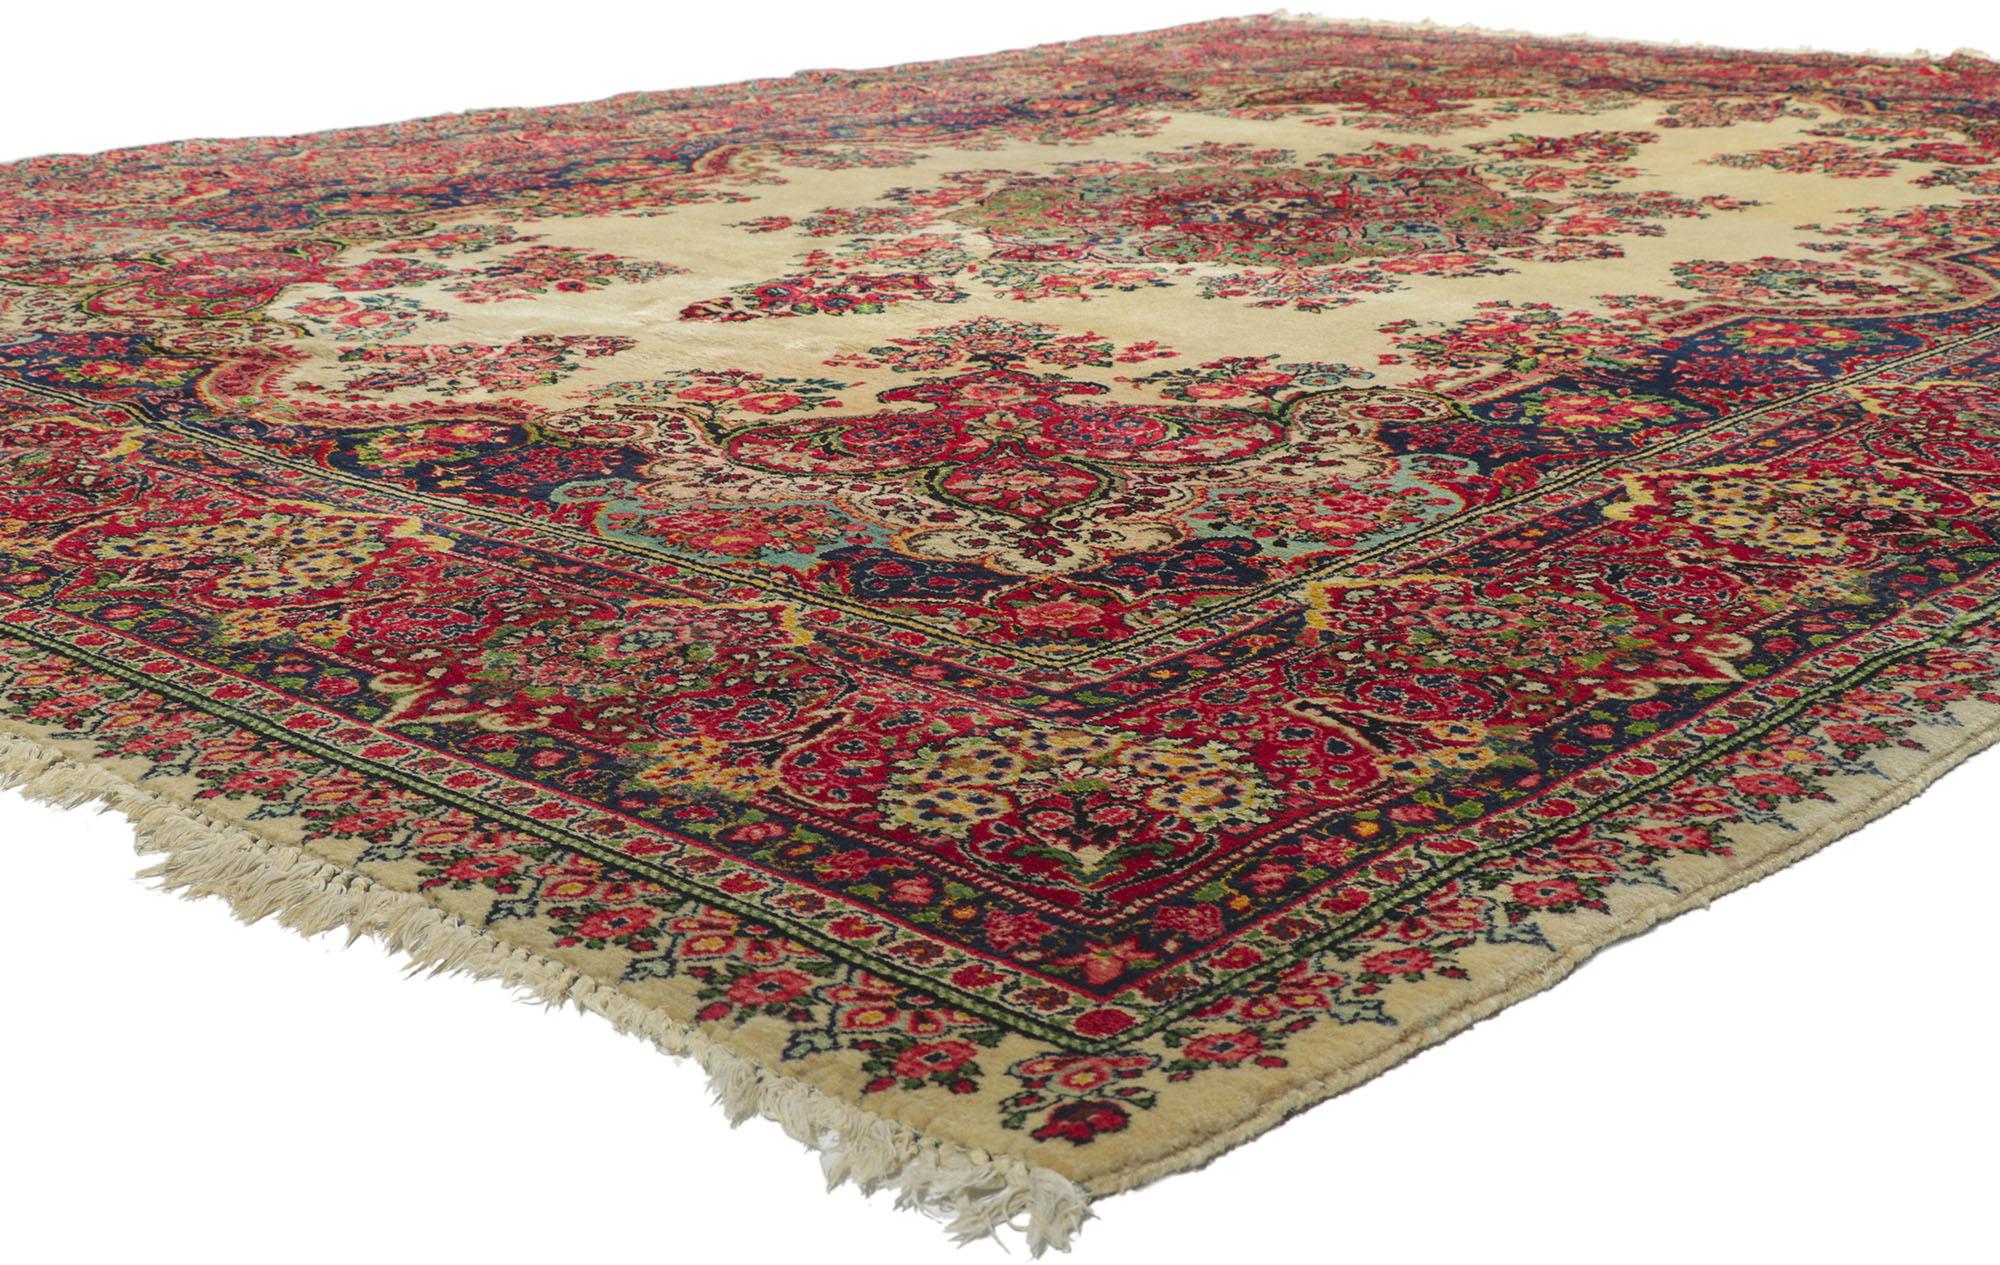 78229 Vintage Persian Sarouk Rug, 10'03 x 13'09. ​Rich in color with incredible detail and texture, this hand knotted vintage Persian Sarouk rug is a captivating vision of woven beauty. The magestic floral design and lively color palette woven into